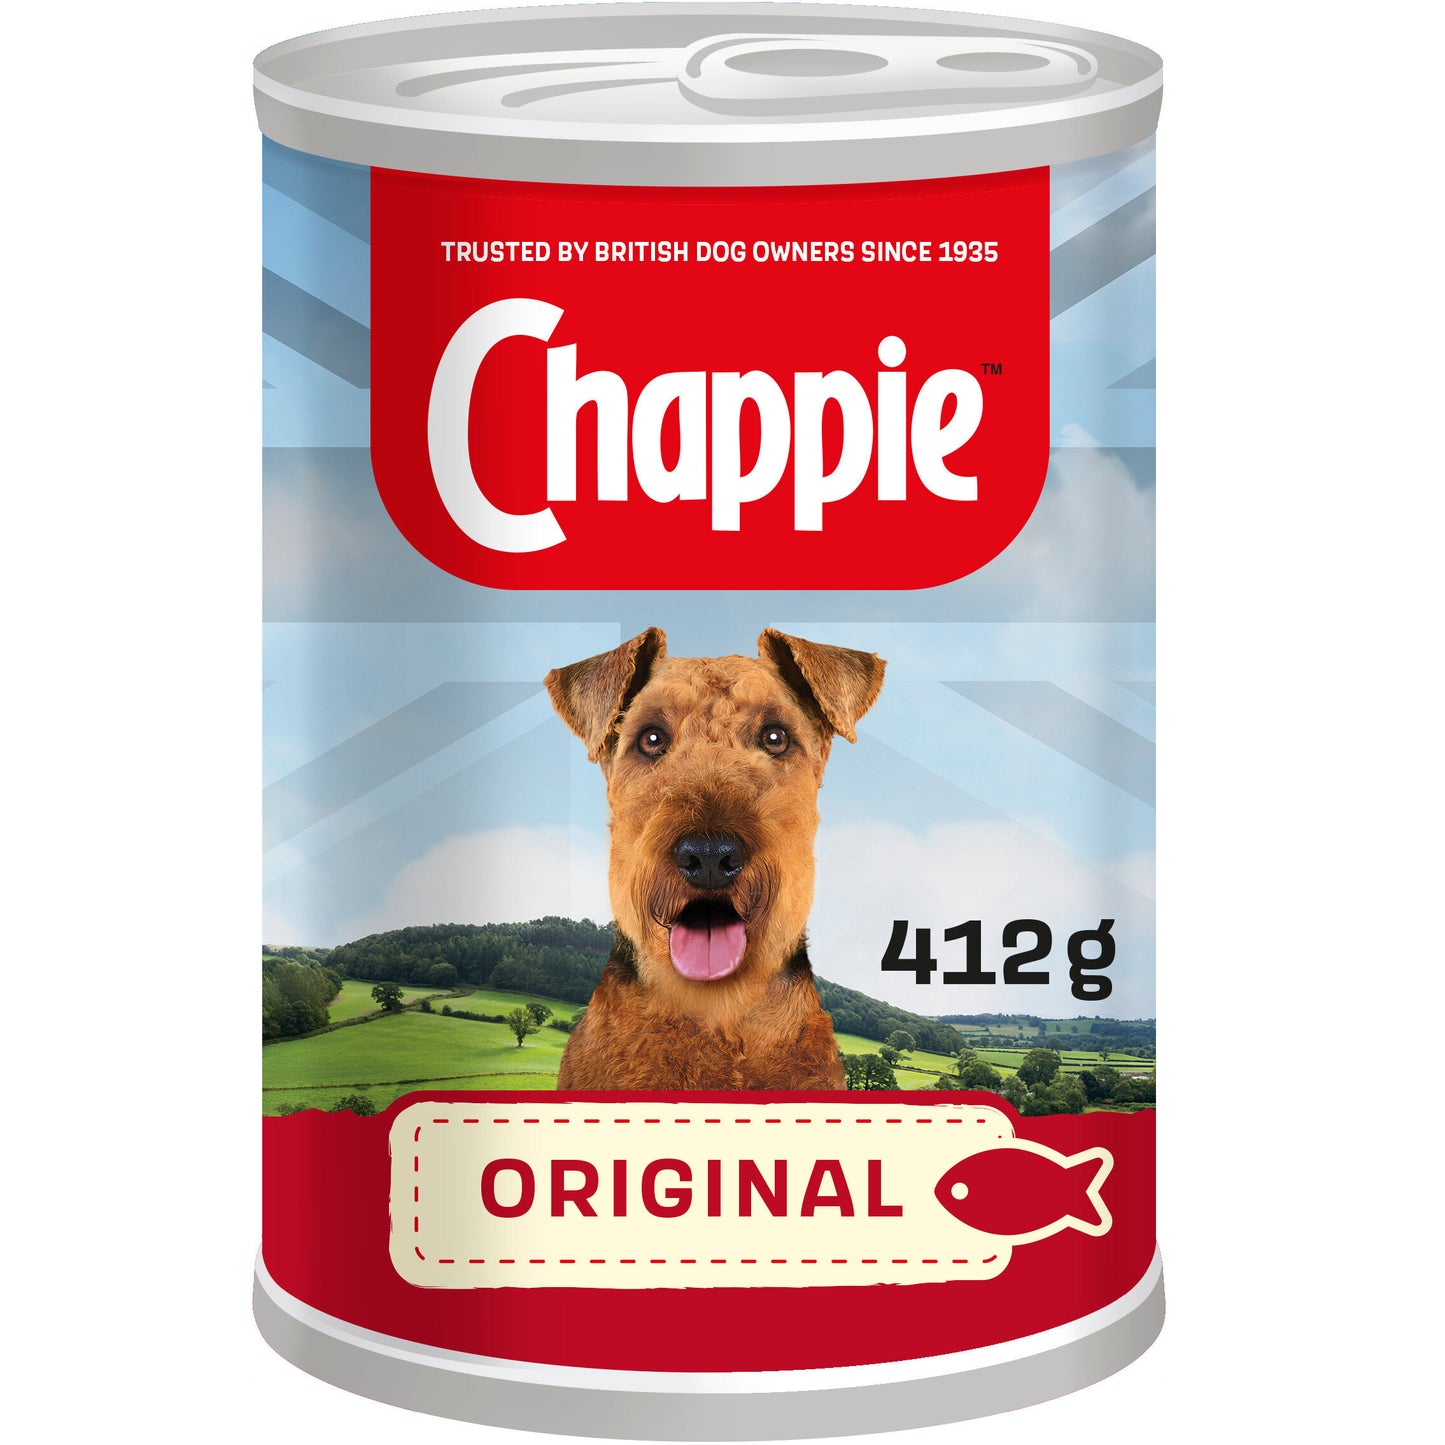 CHAPPIE® Original Chunks In Loaf Wet Dog Food - 12 x 412g